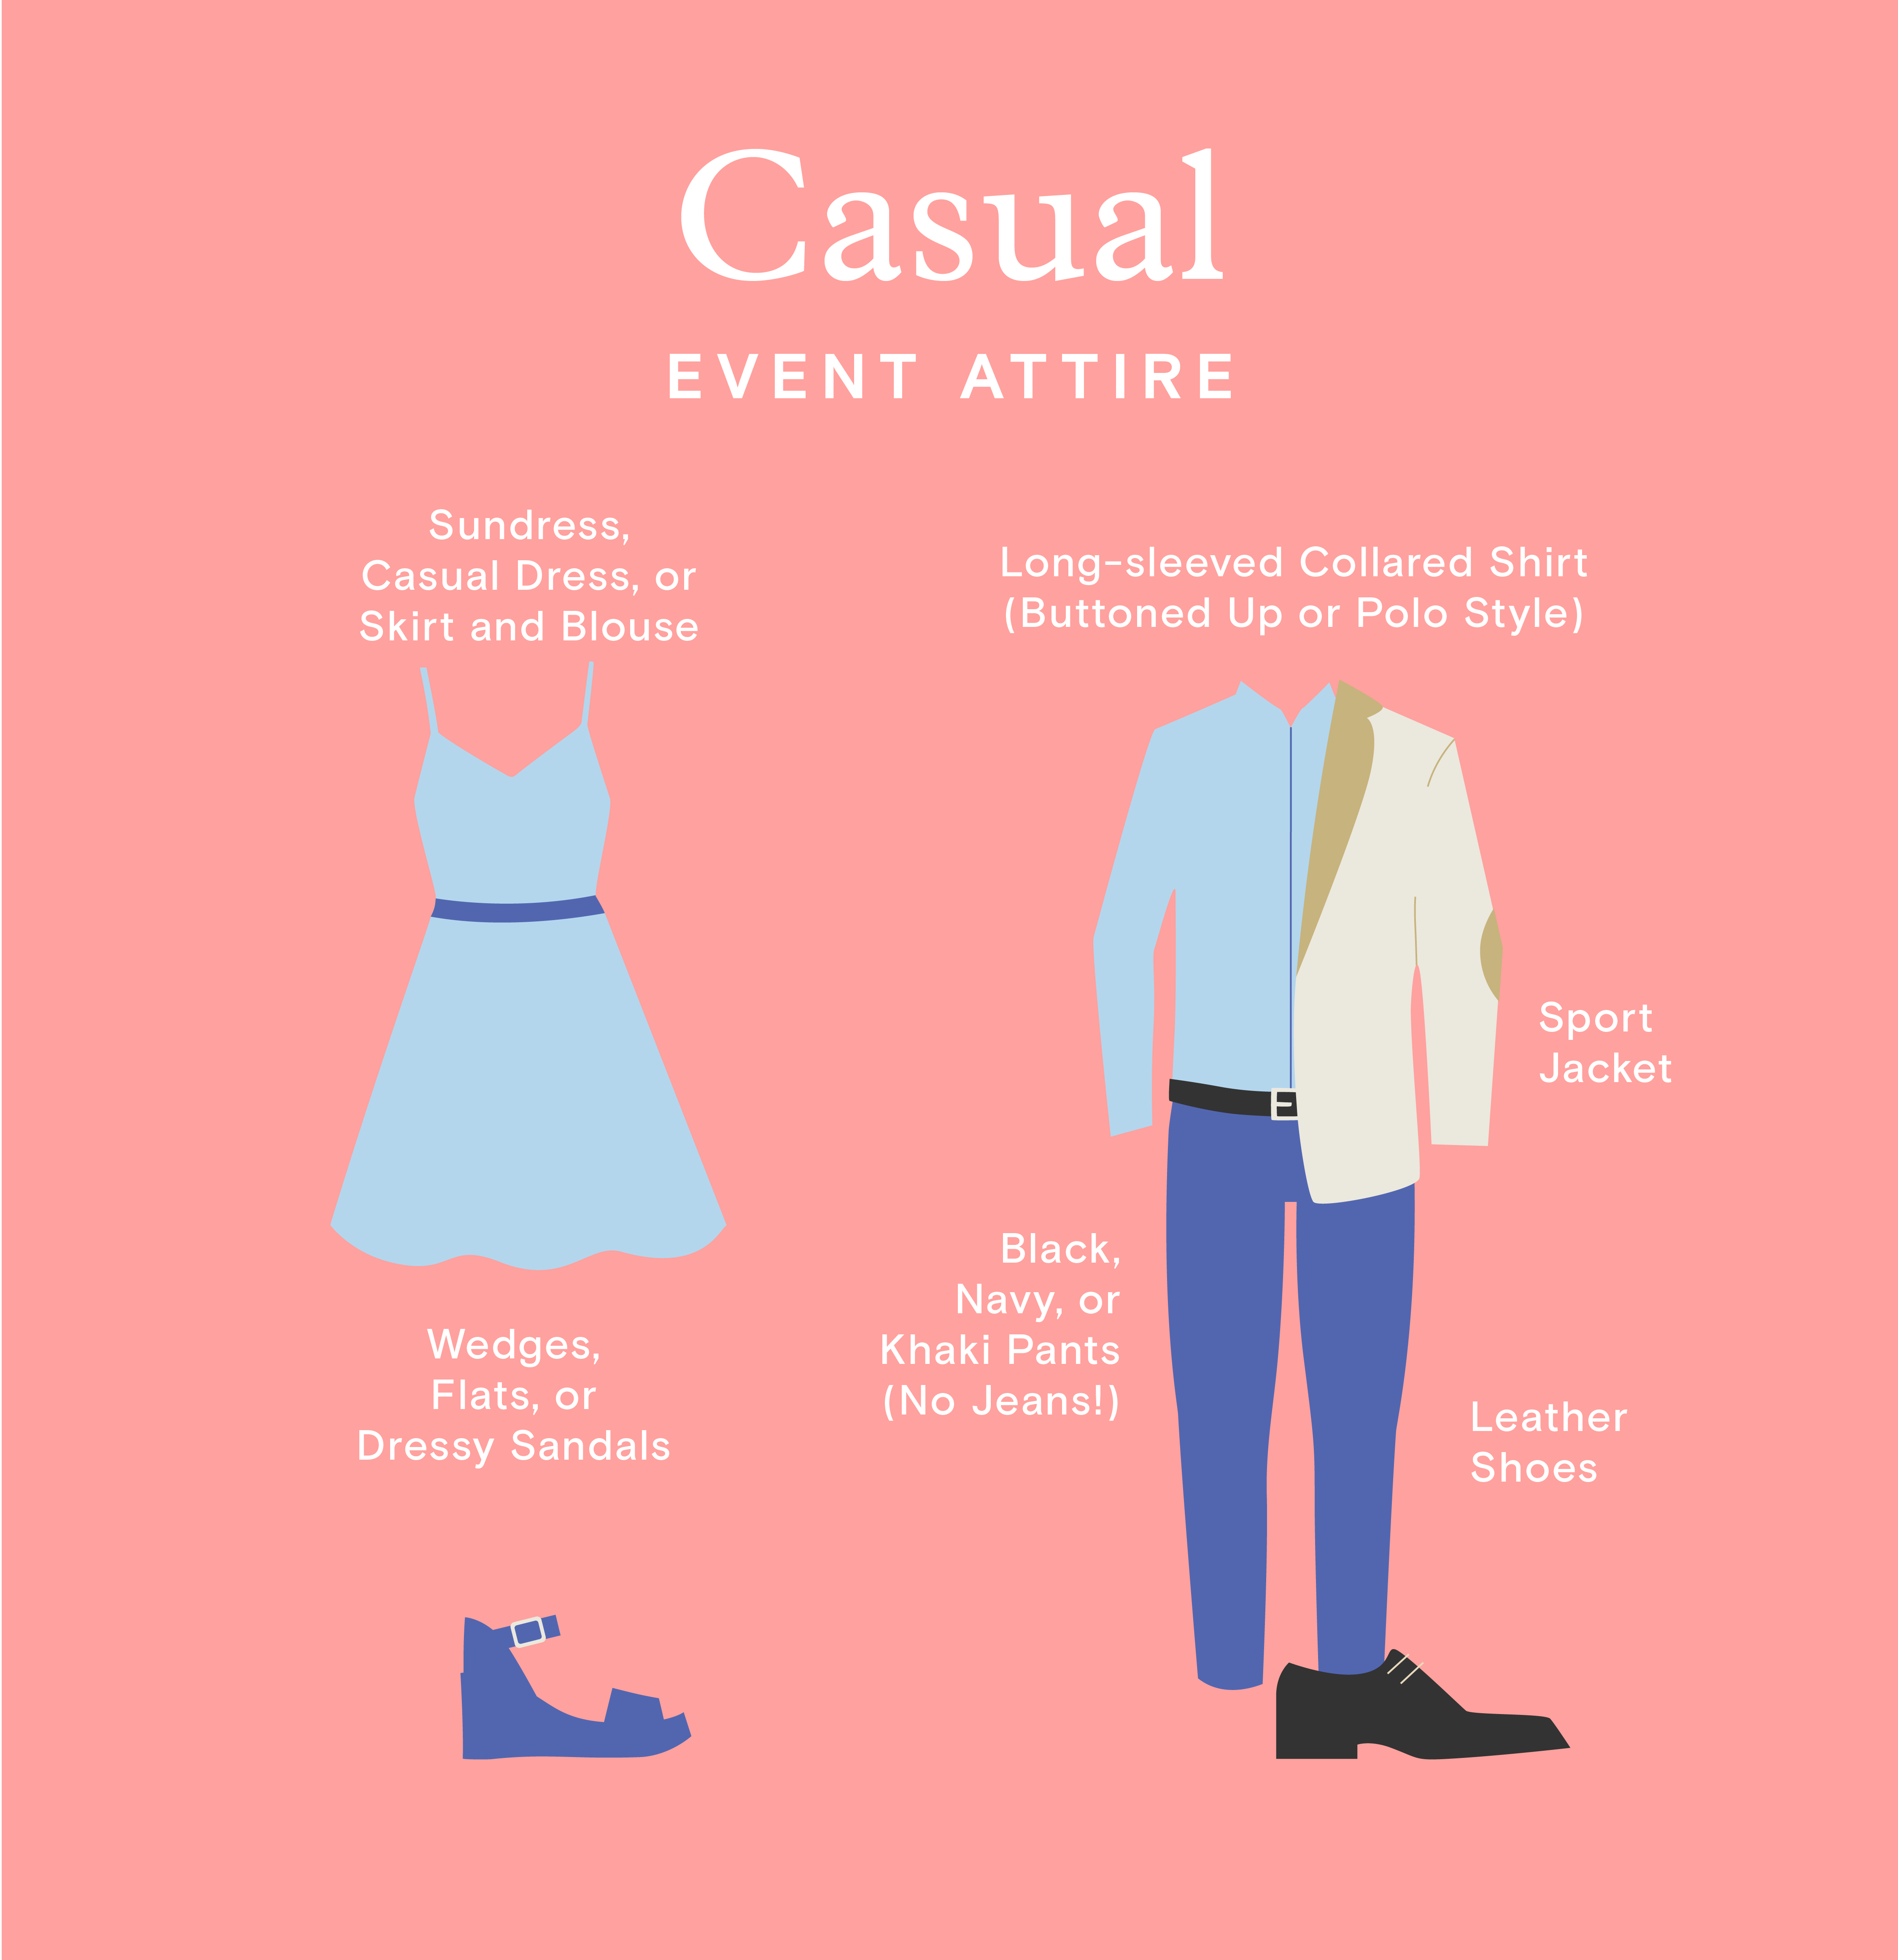 An illustration of casual attire for women and for men featuring items from the list like a sundress, a sport jacket, and navy pants.